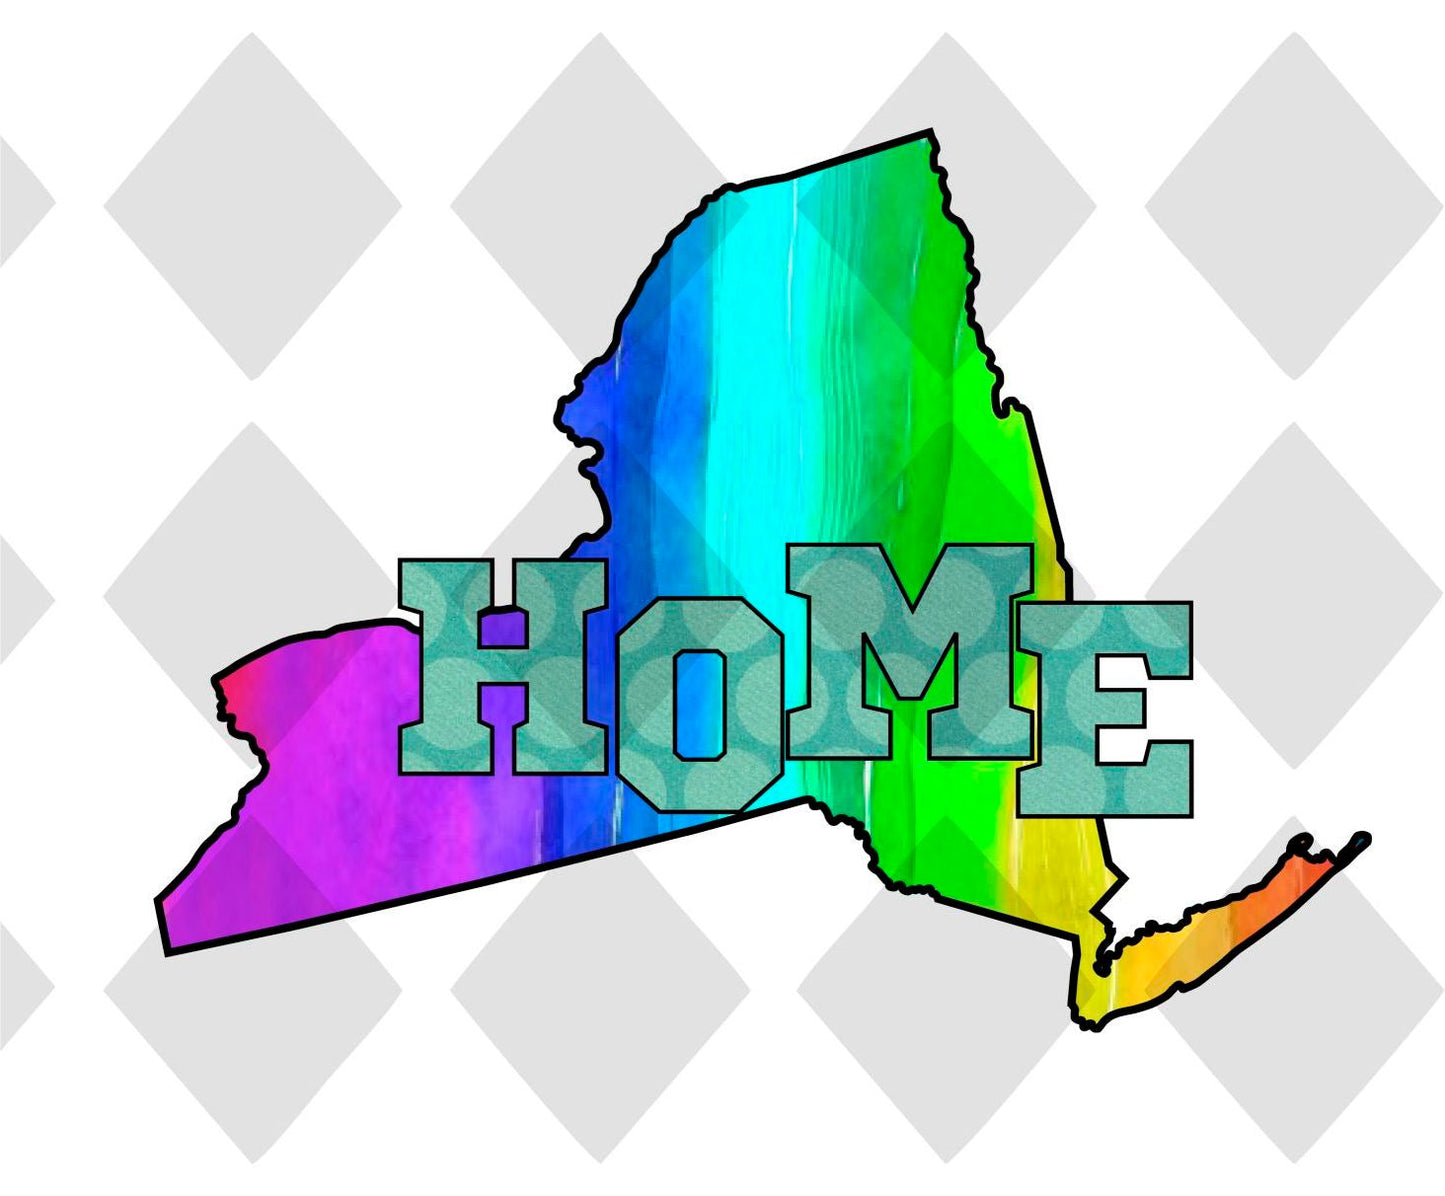 New York STATE HOME png Digital Download Instand Download